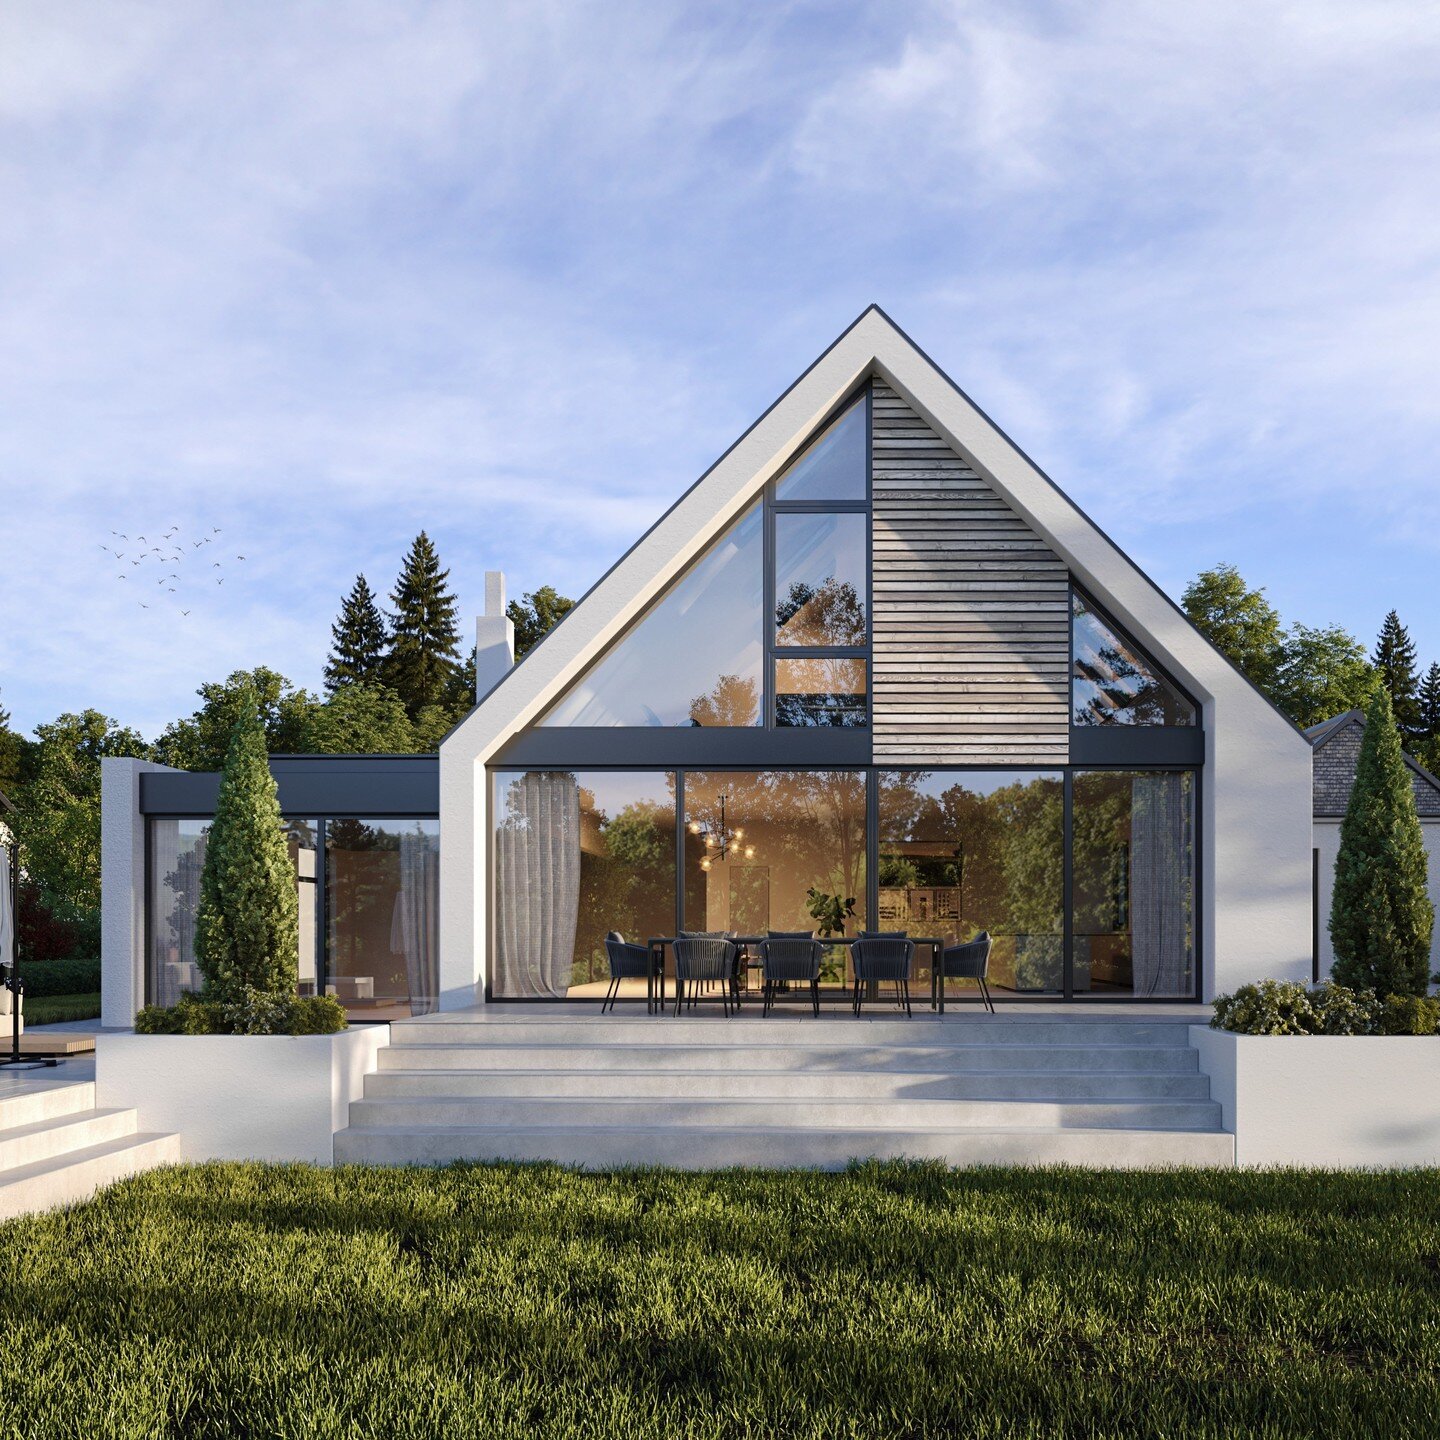 Chine House

// a home renovation and extension project - planning recently approved and now on site.

// This is not your average bungalow! Split level living, a sunken living room, double height kitchen light well - we like to make your home bespok